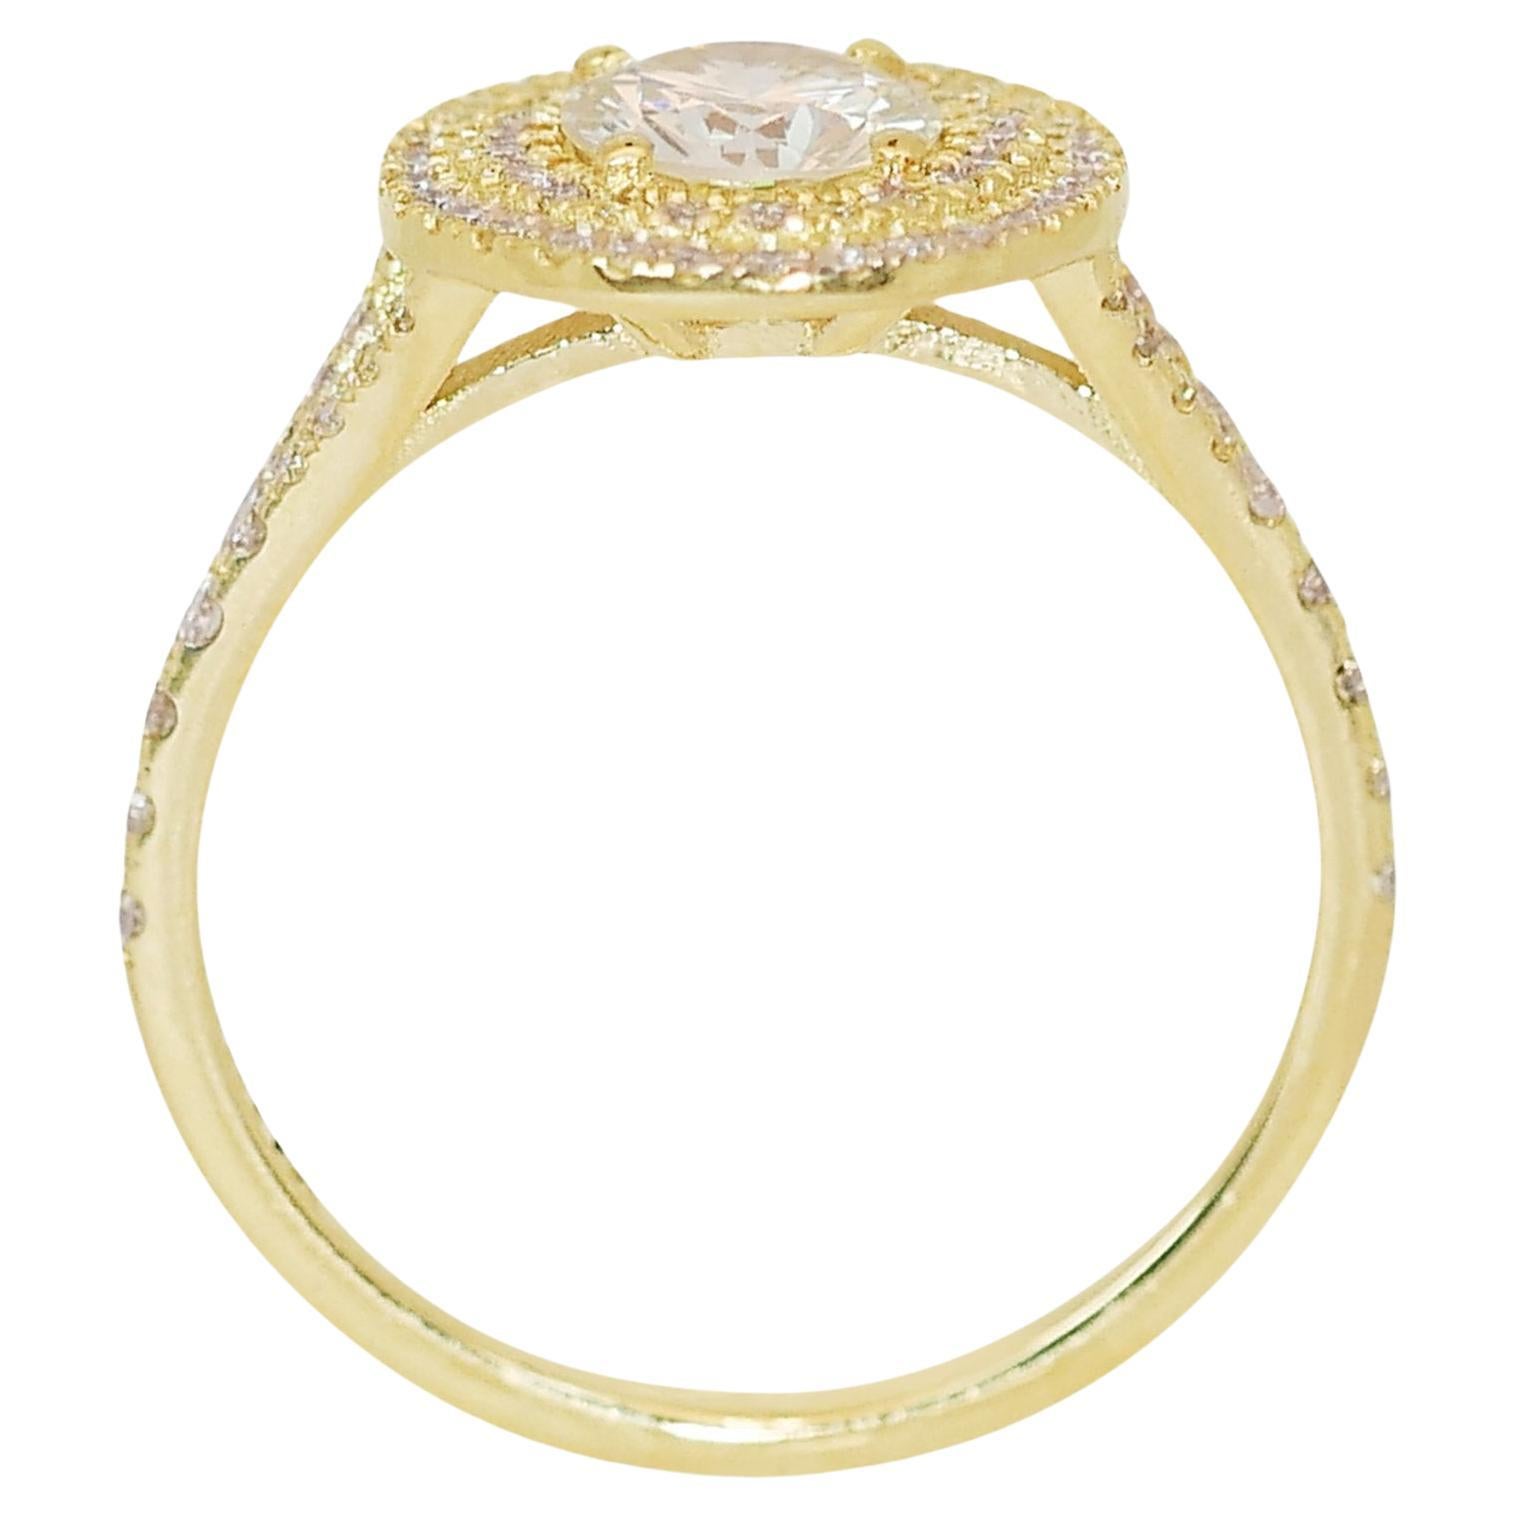 Women's Exquisite 1.44ct Diamond Double Halo Ring in 18k Yellow Gold - GIA Certified For Sale